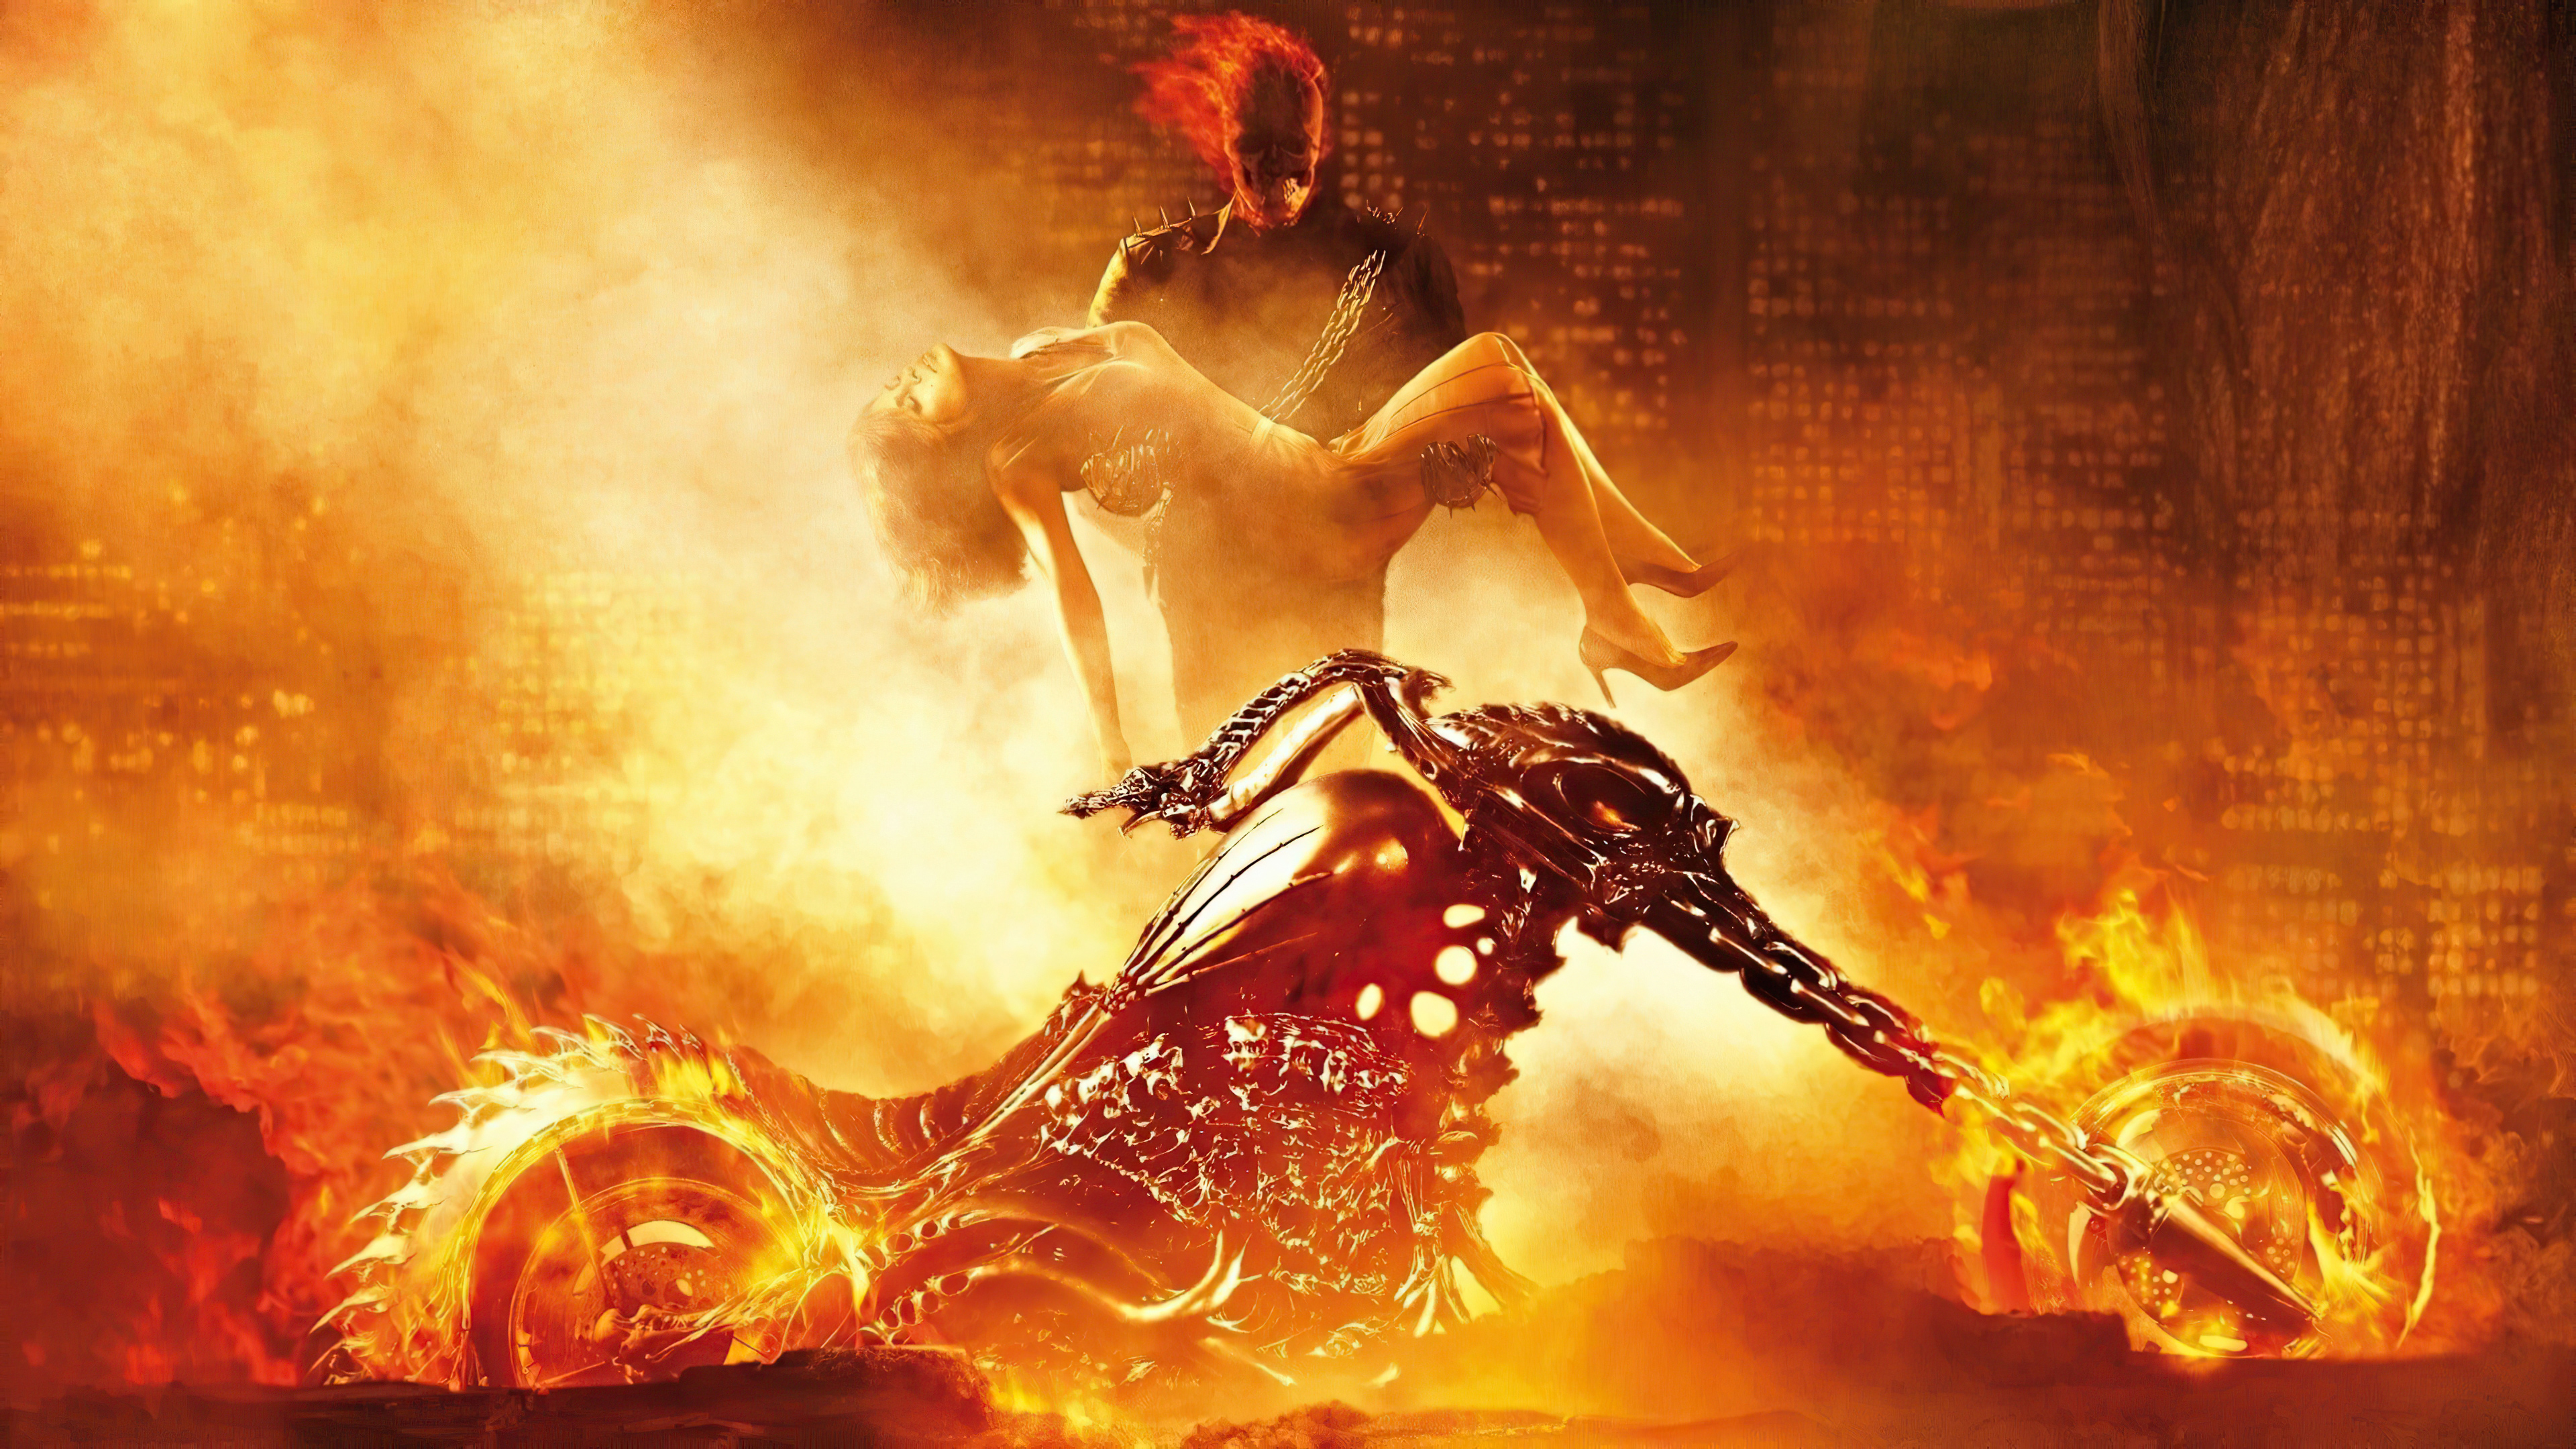 Ghost Rider Biker 2020 4k, HD Superheroes, 4k Wallpapers, Images,  Backgrounds, Photos and Pictures